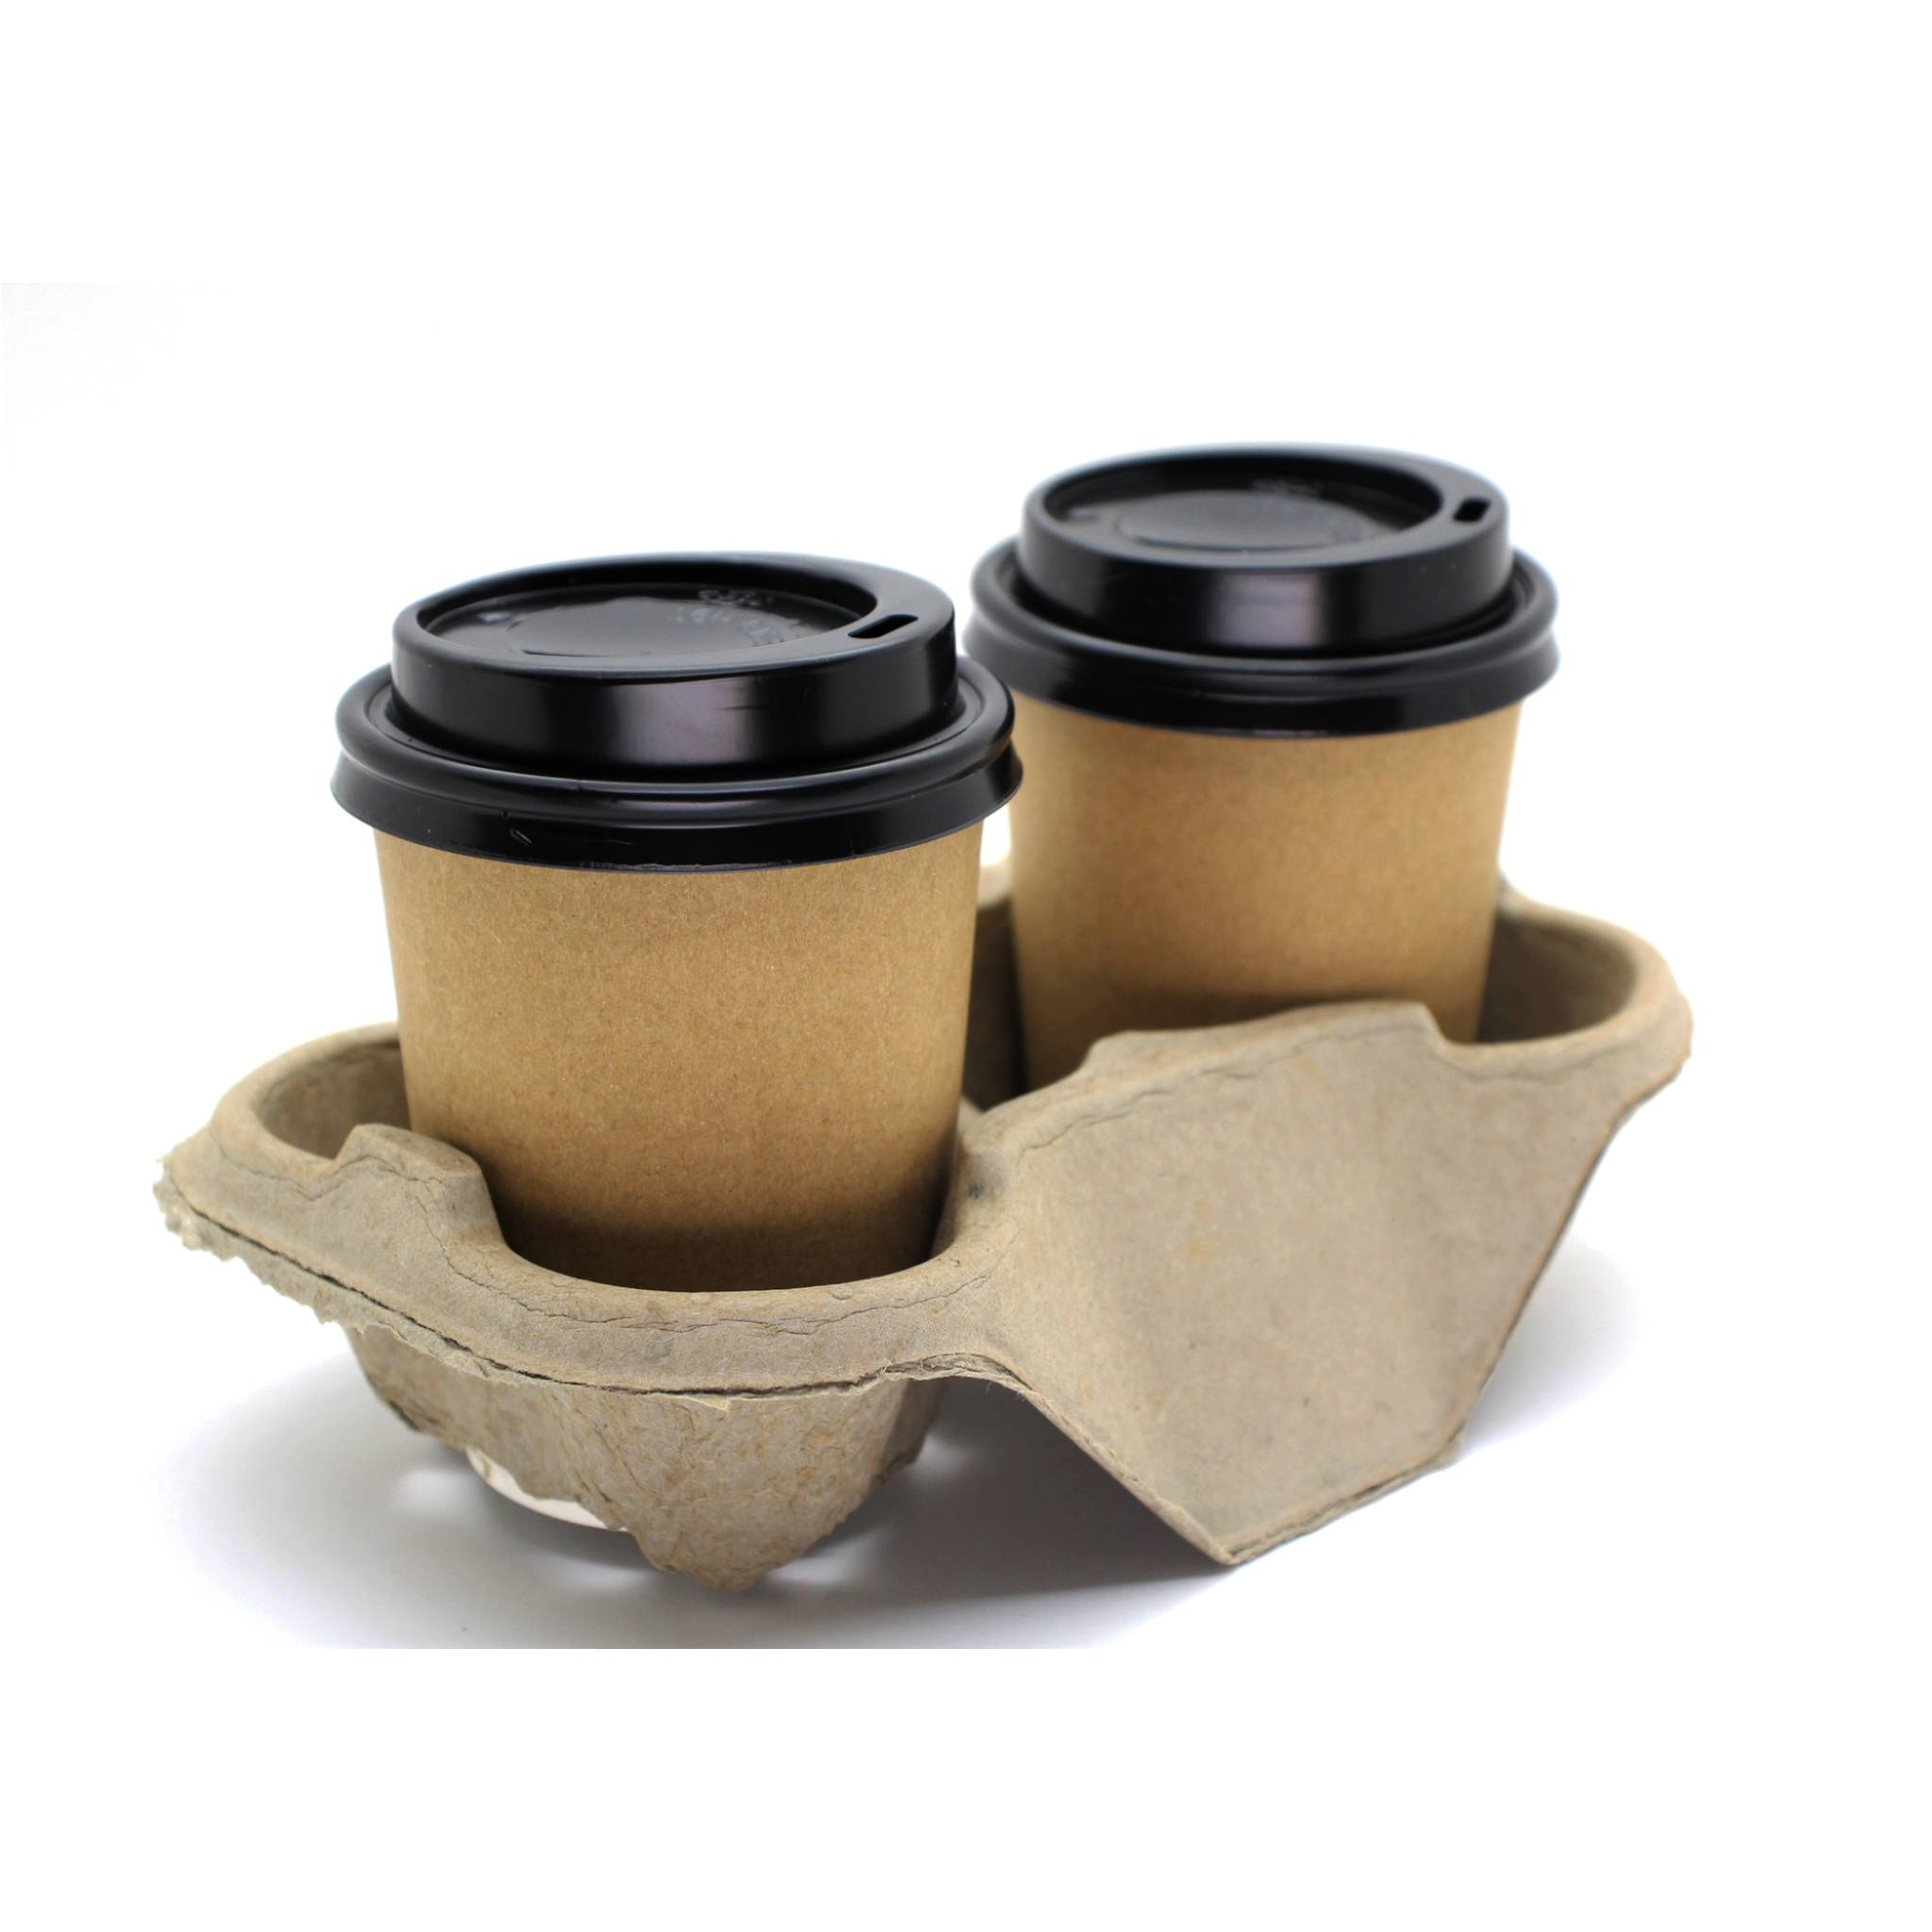 Take Away 2-Cup Holder Disposable Coffee Eco Friendly Compostable Pulp Tray 10pack